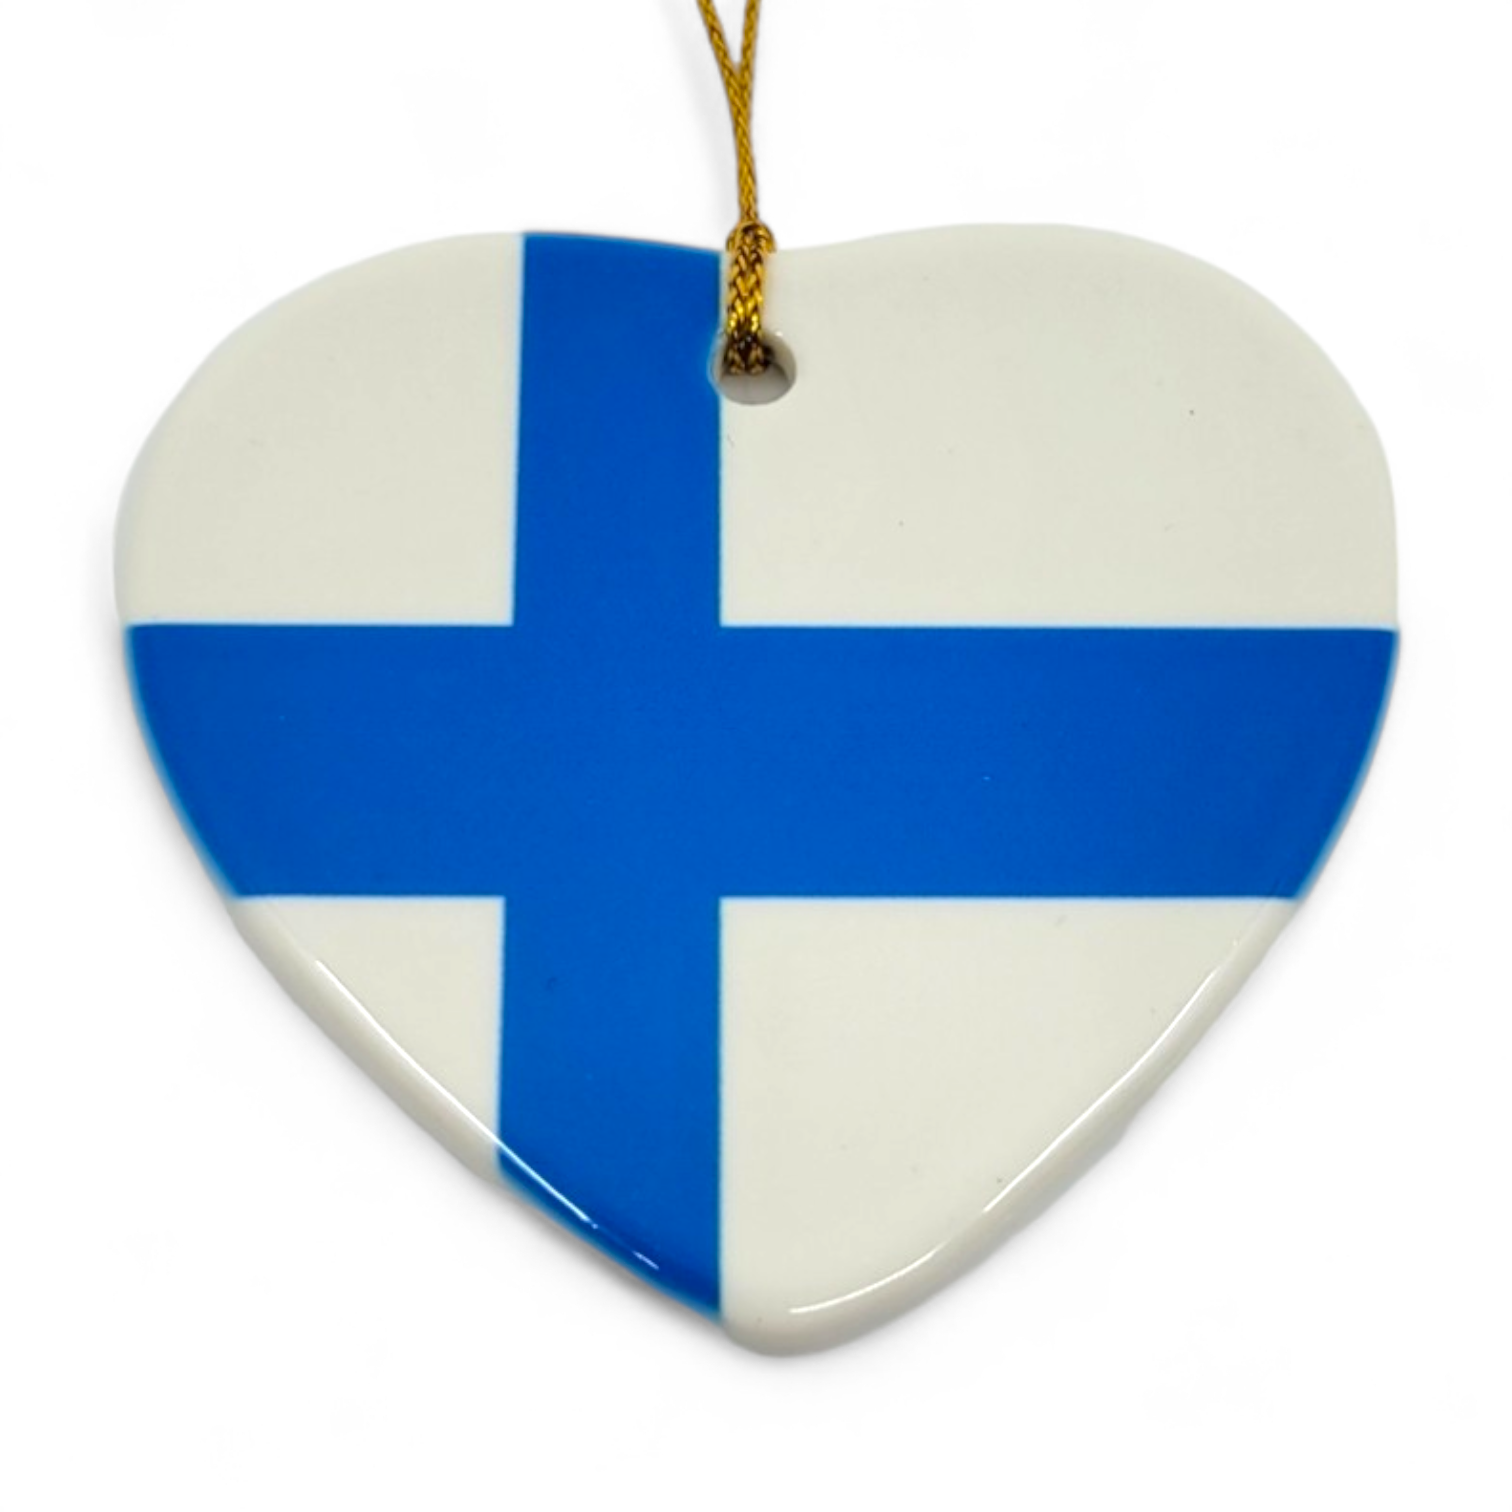 Ornament: 3" Heart Shaped Finland Flag